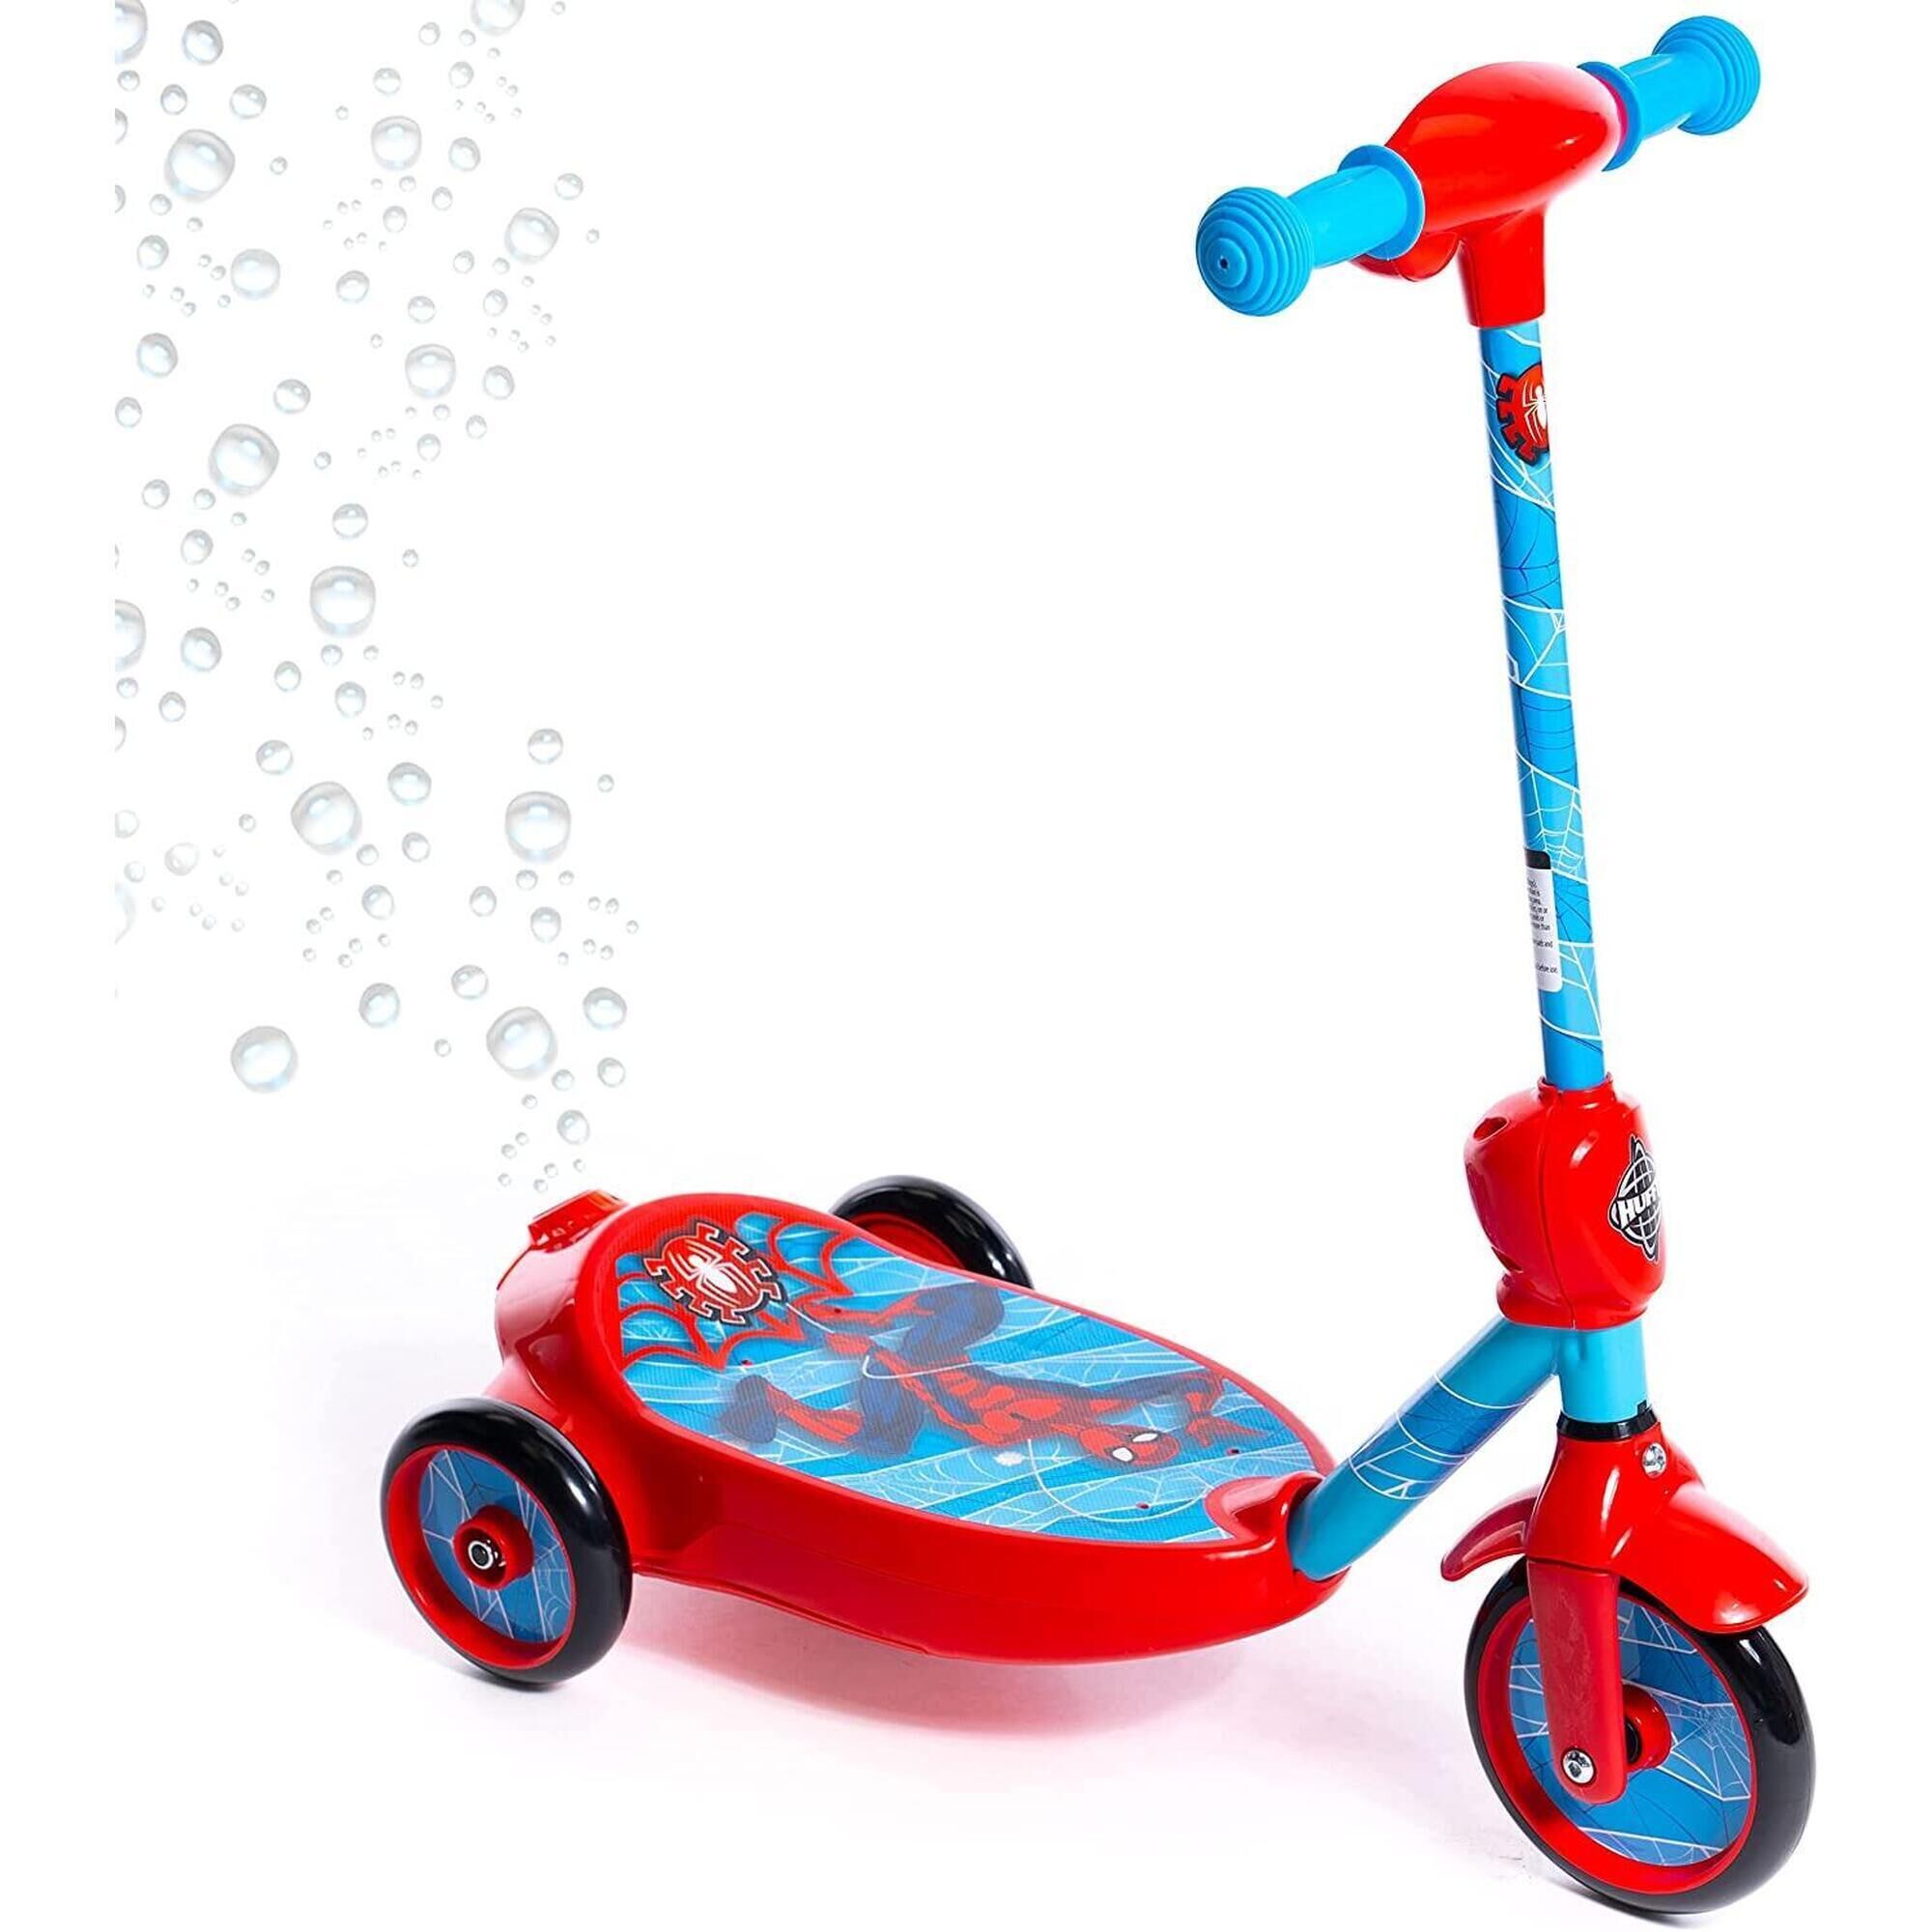 MARVEL Huffy Marvel Spiderman Bubble Electric Scooter For Kids 3-5 Years